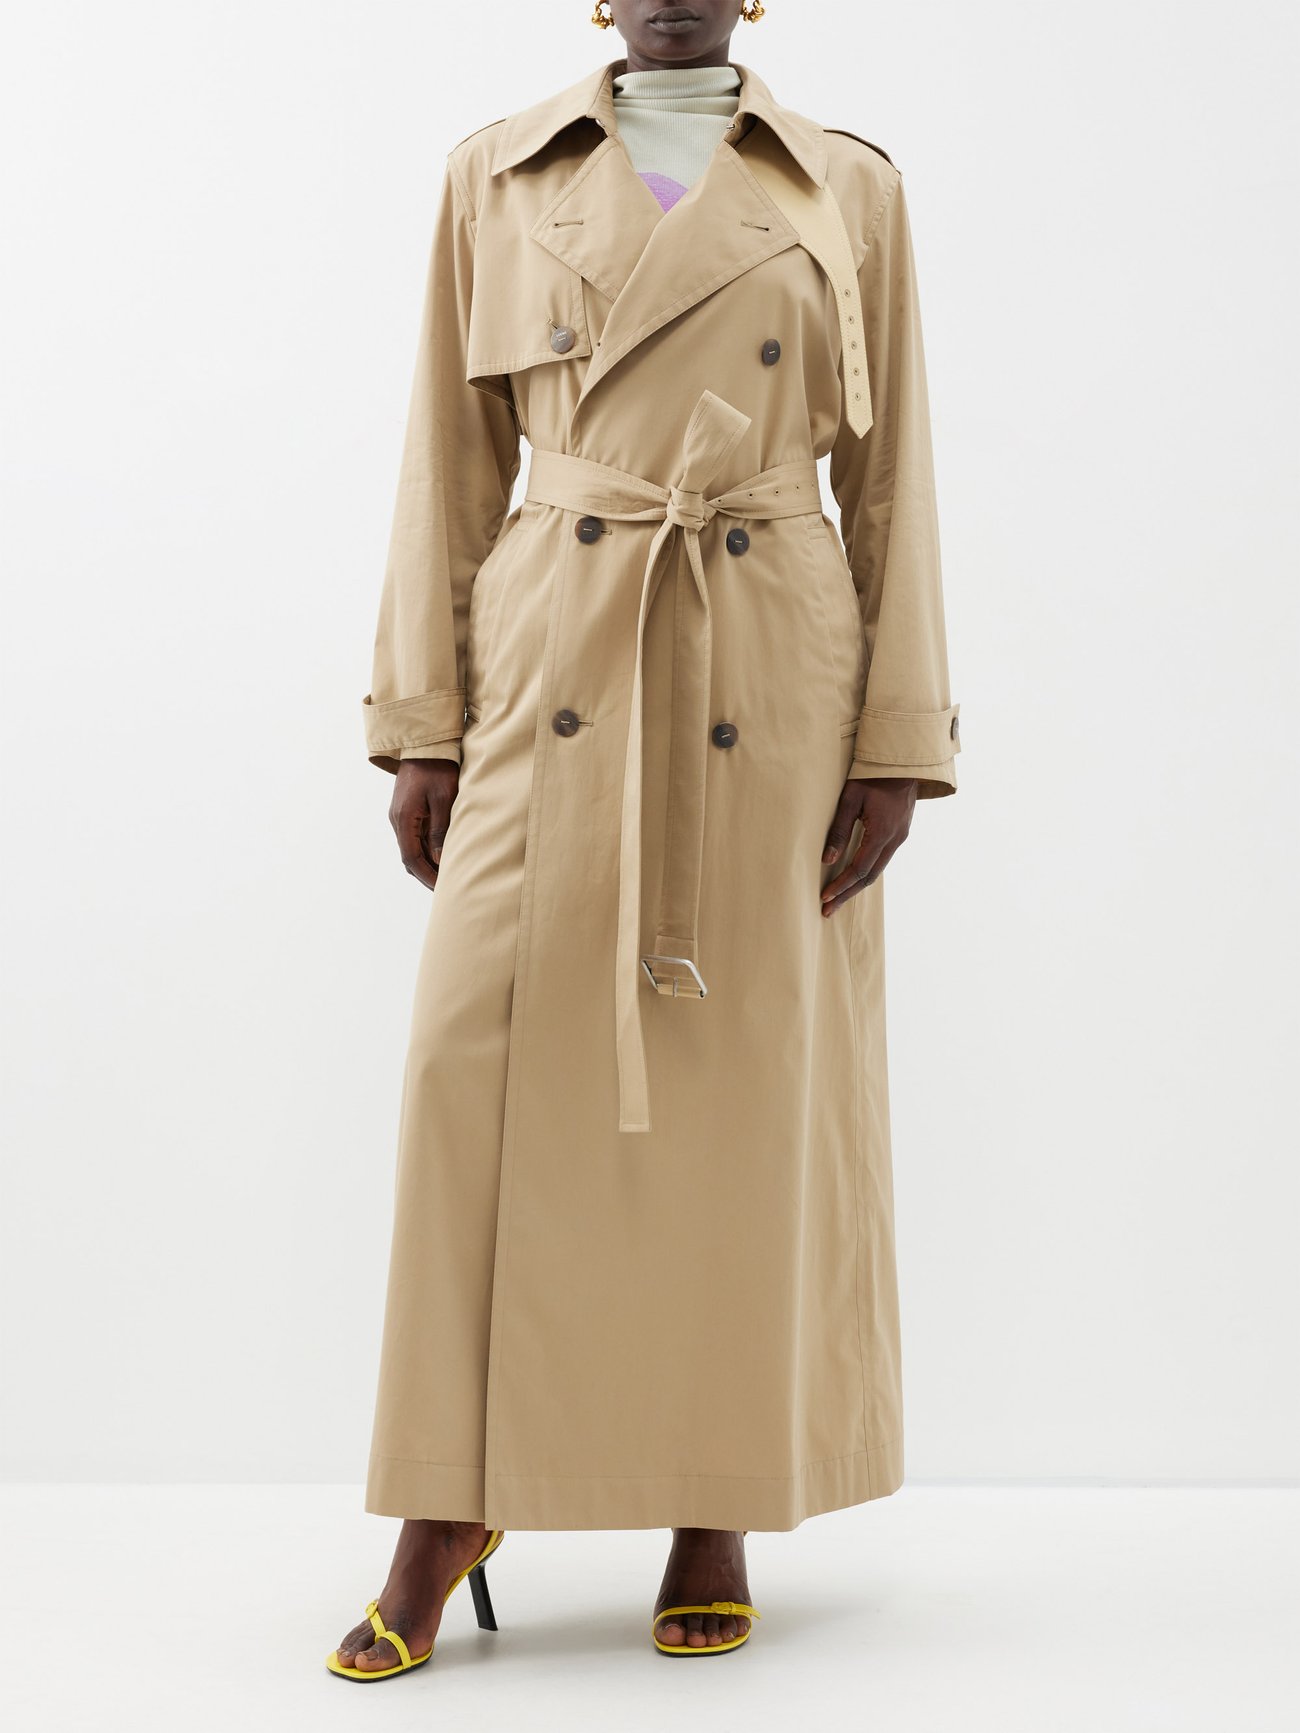 Tailored to a floor-length hem, LOEWE’s beige gabardine trench coat spotlights a storm flap, sharp notch lapels and is cinched at the waist with a buckled belt.